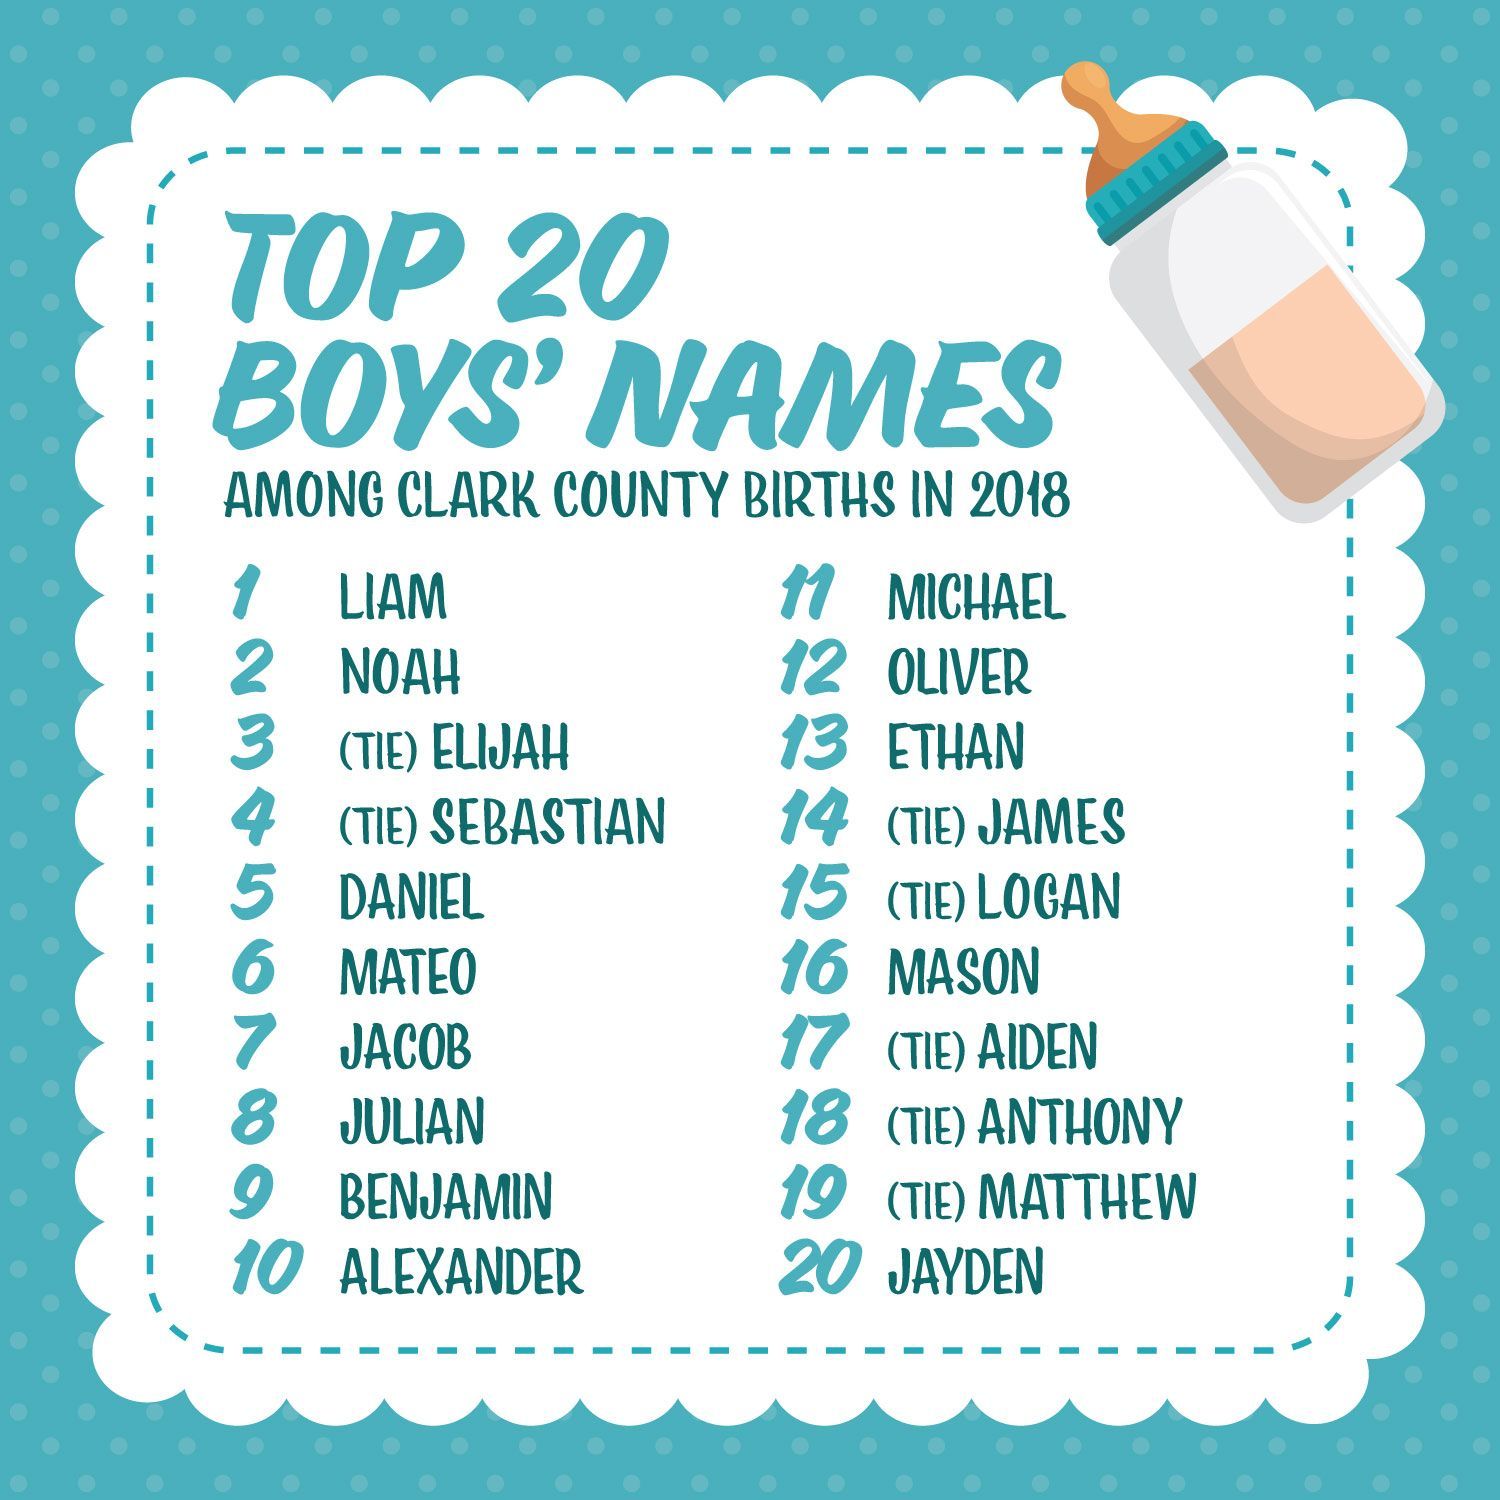 SN Health District on Twitter: "Did your baby's name make the list